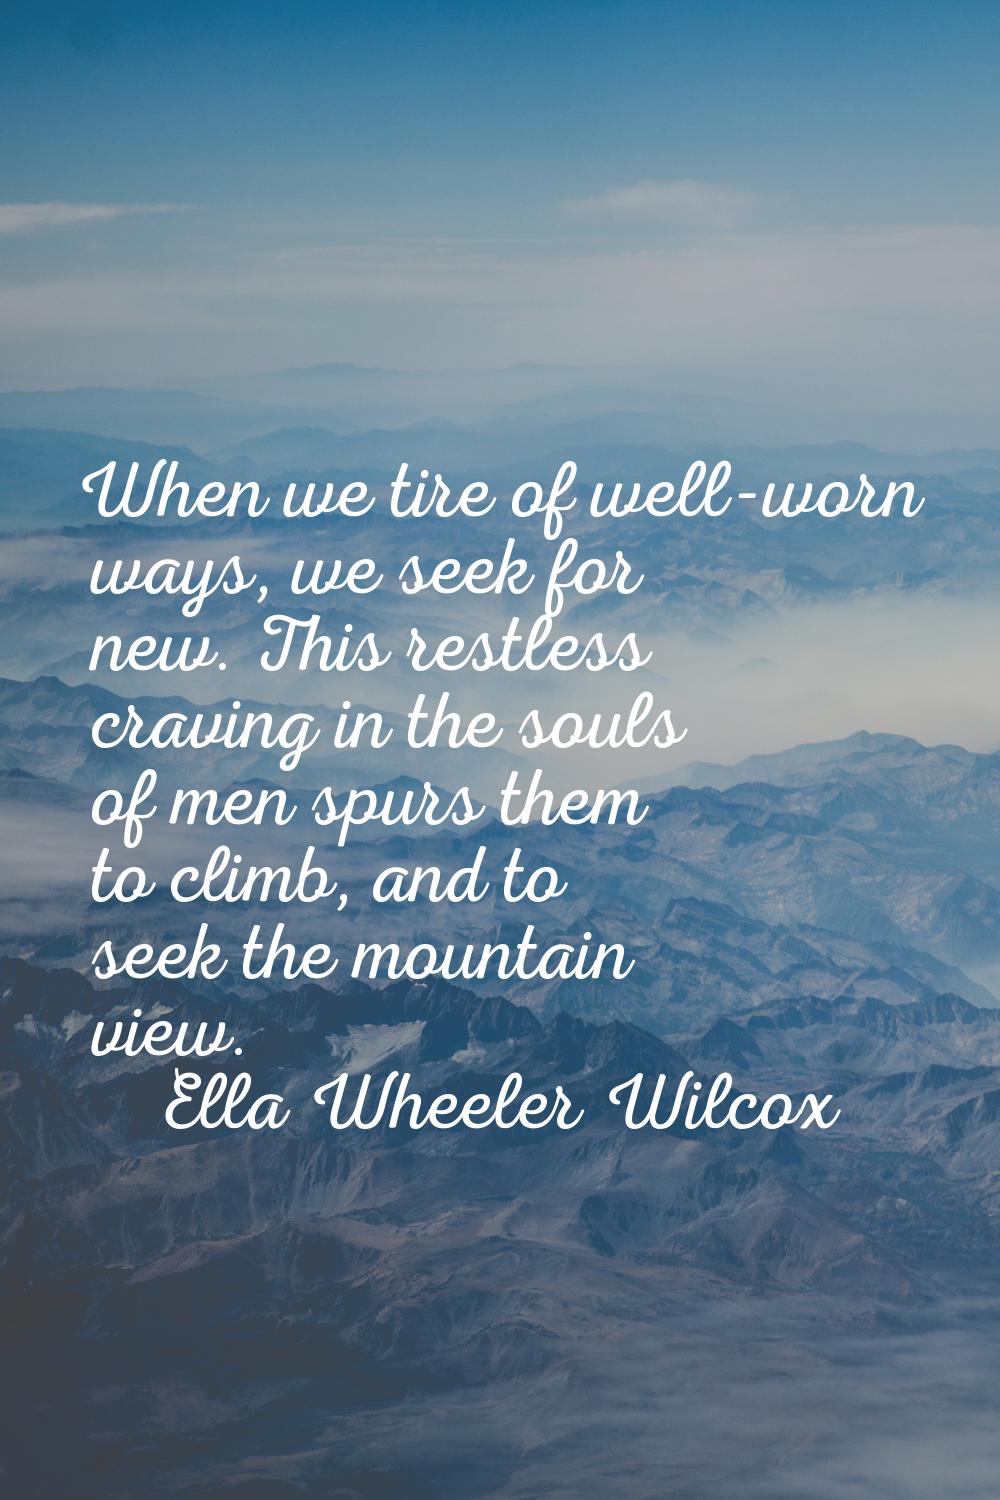 When we tire of well-worn ways, we seek for new. This restless craving in the souls of men spurs th